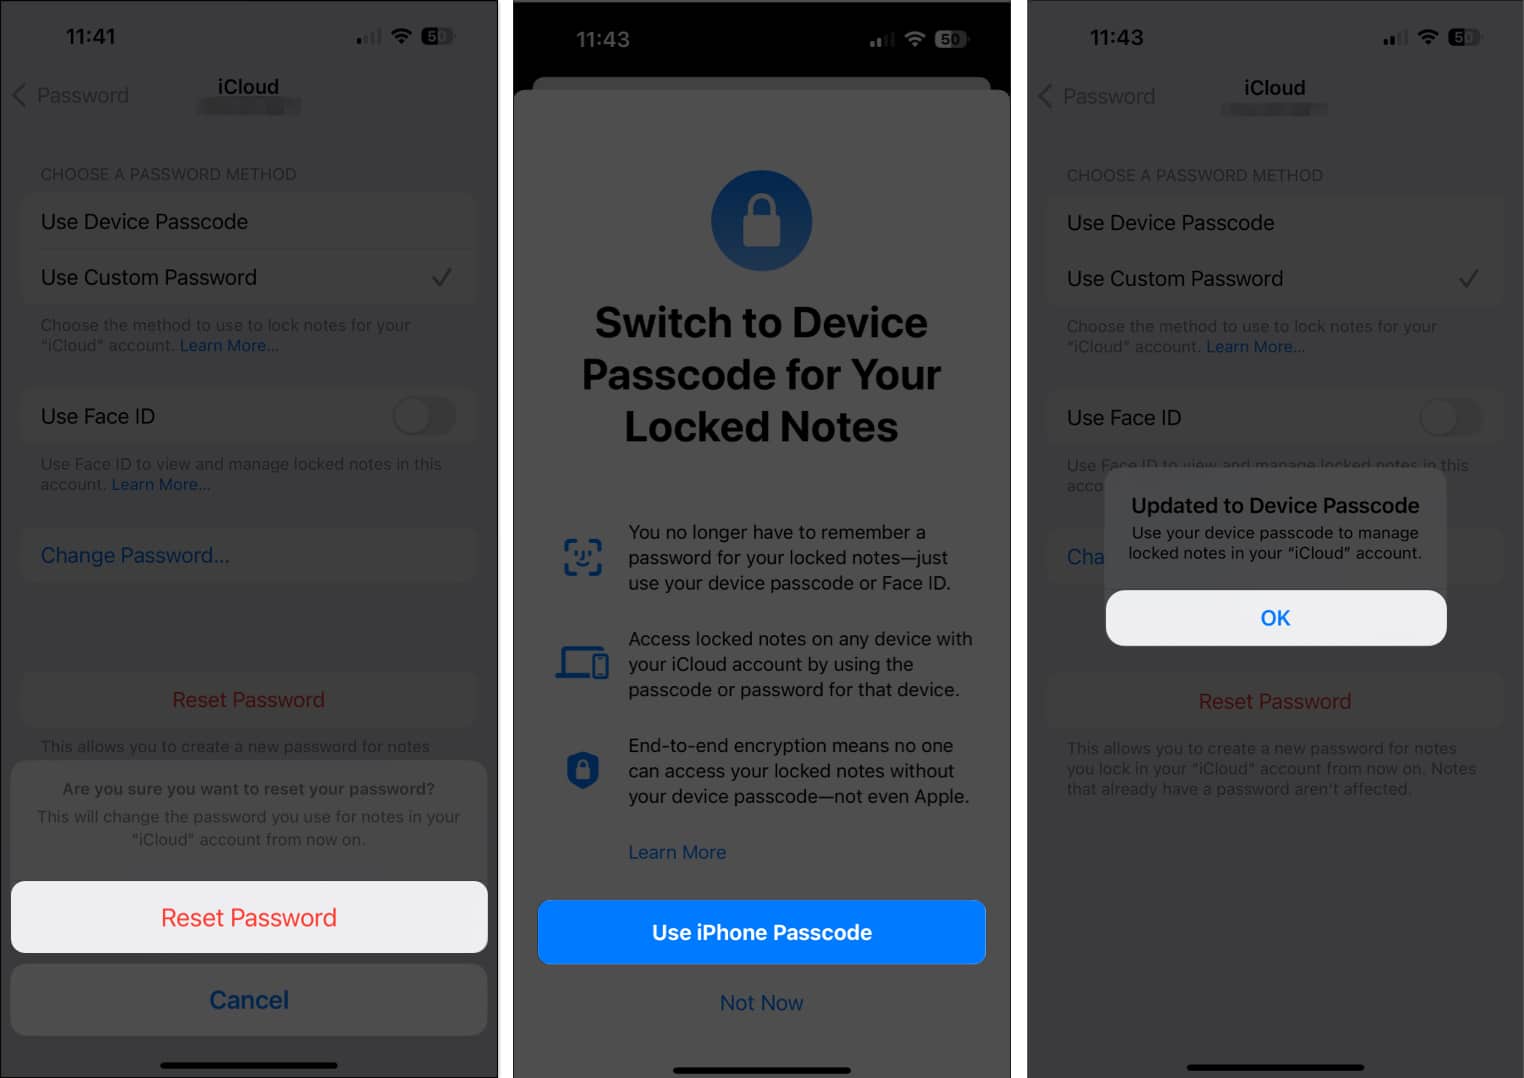 Reset Password as Devices passcode in notes app